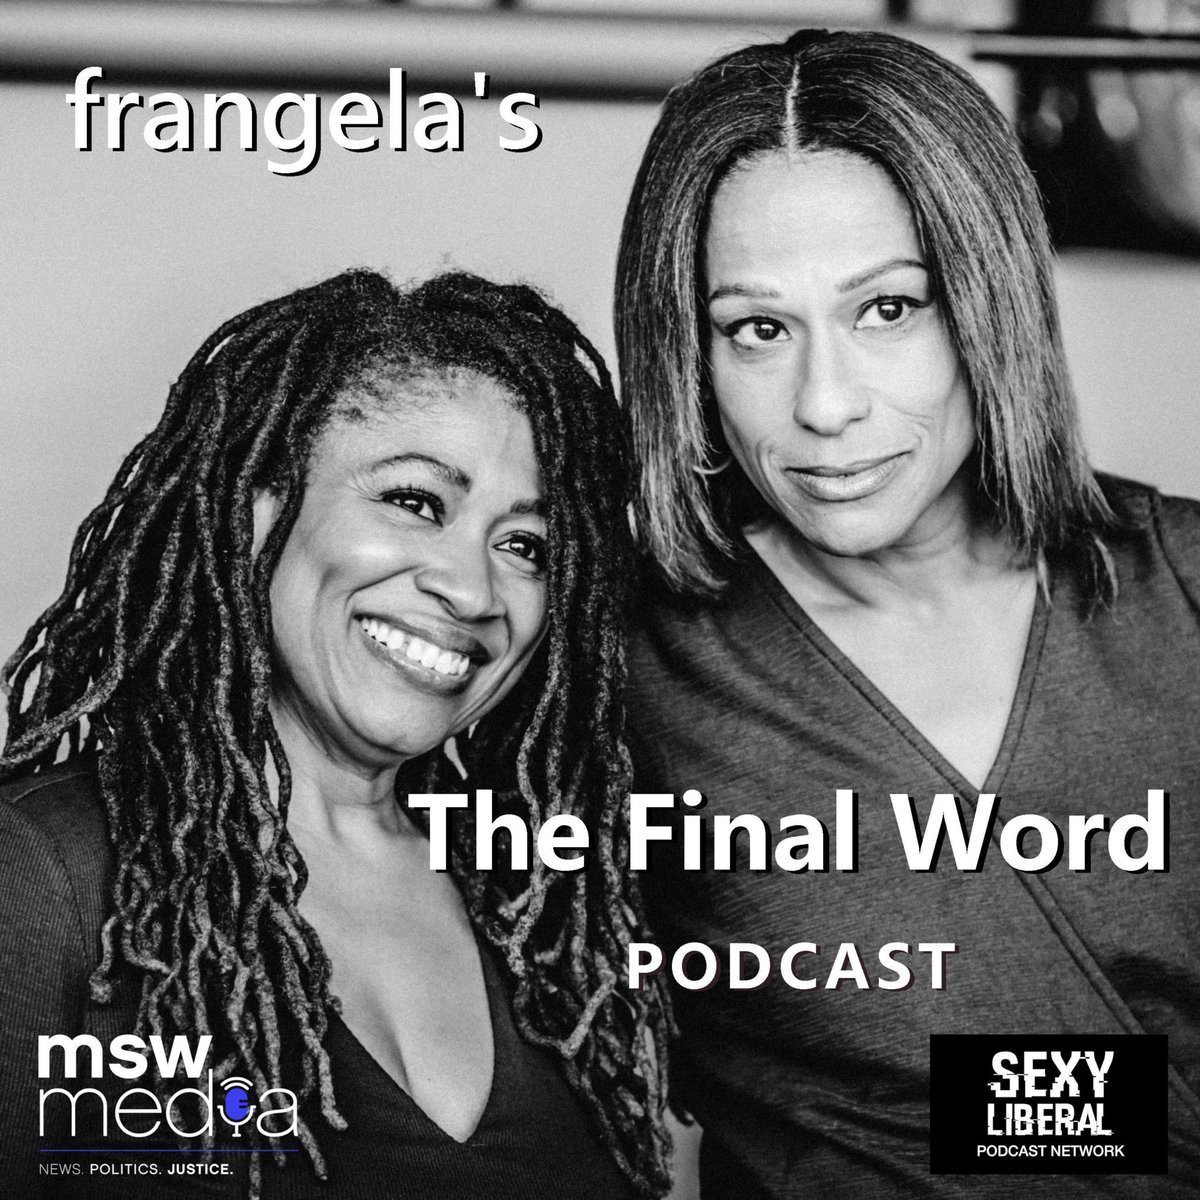 New #TheFinalWord with @frangeladuo drops today! #MSWMedia 💋

Show Links: link.chtbl.com/frangela-the-f…